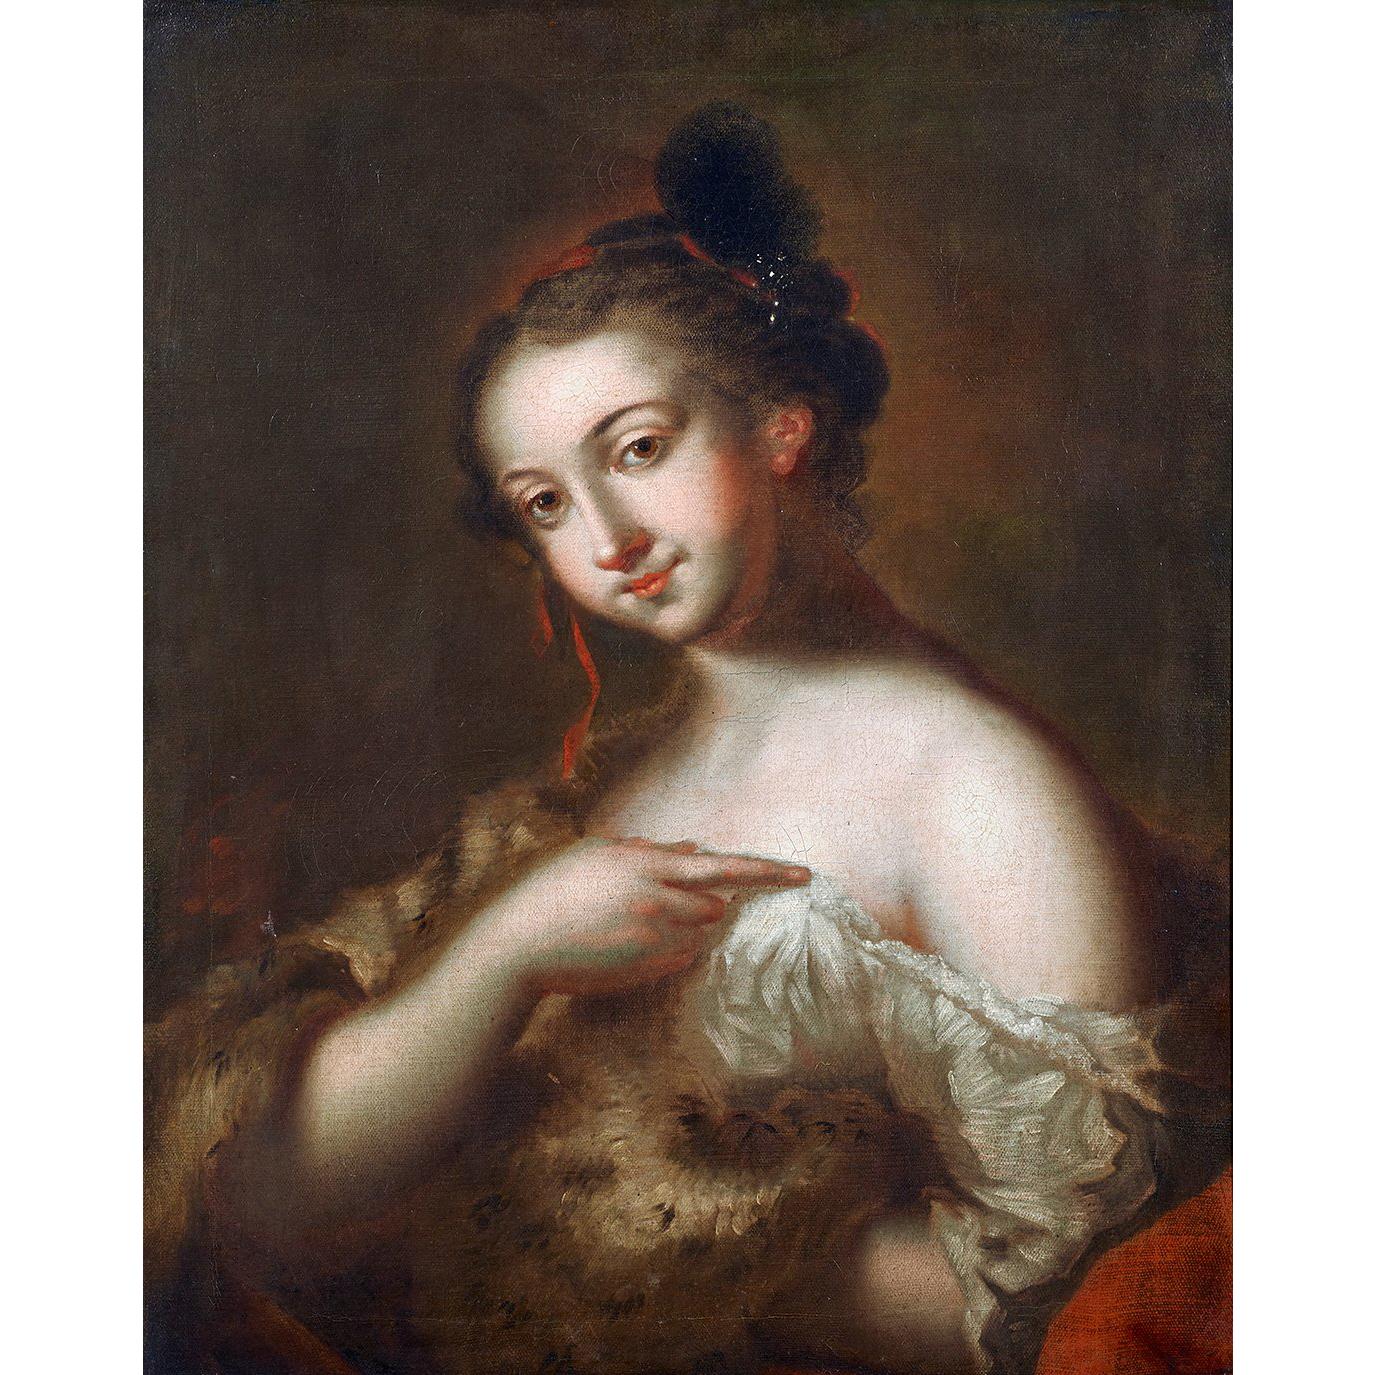 Ritratto, French School 18th Century Oil on Canvas Portrait Painting